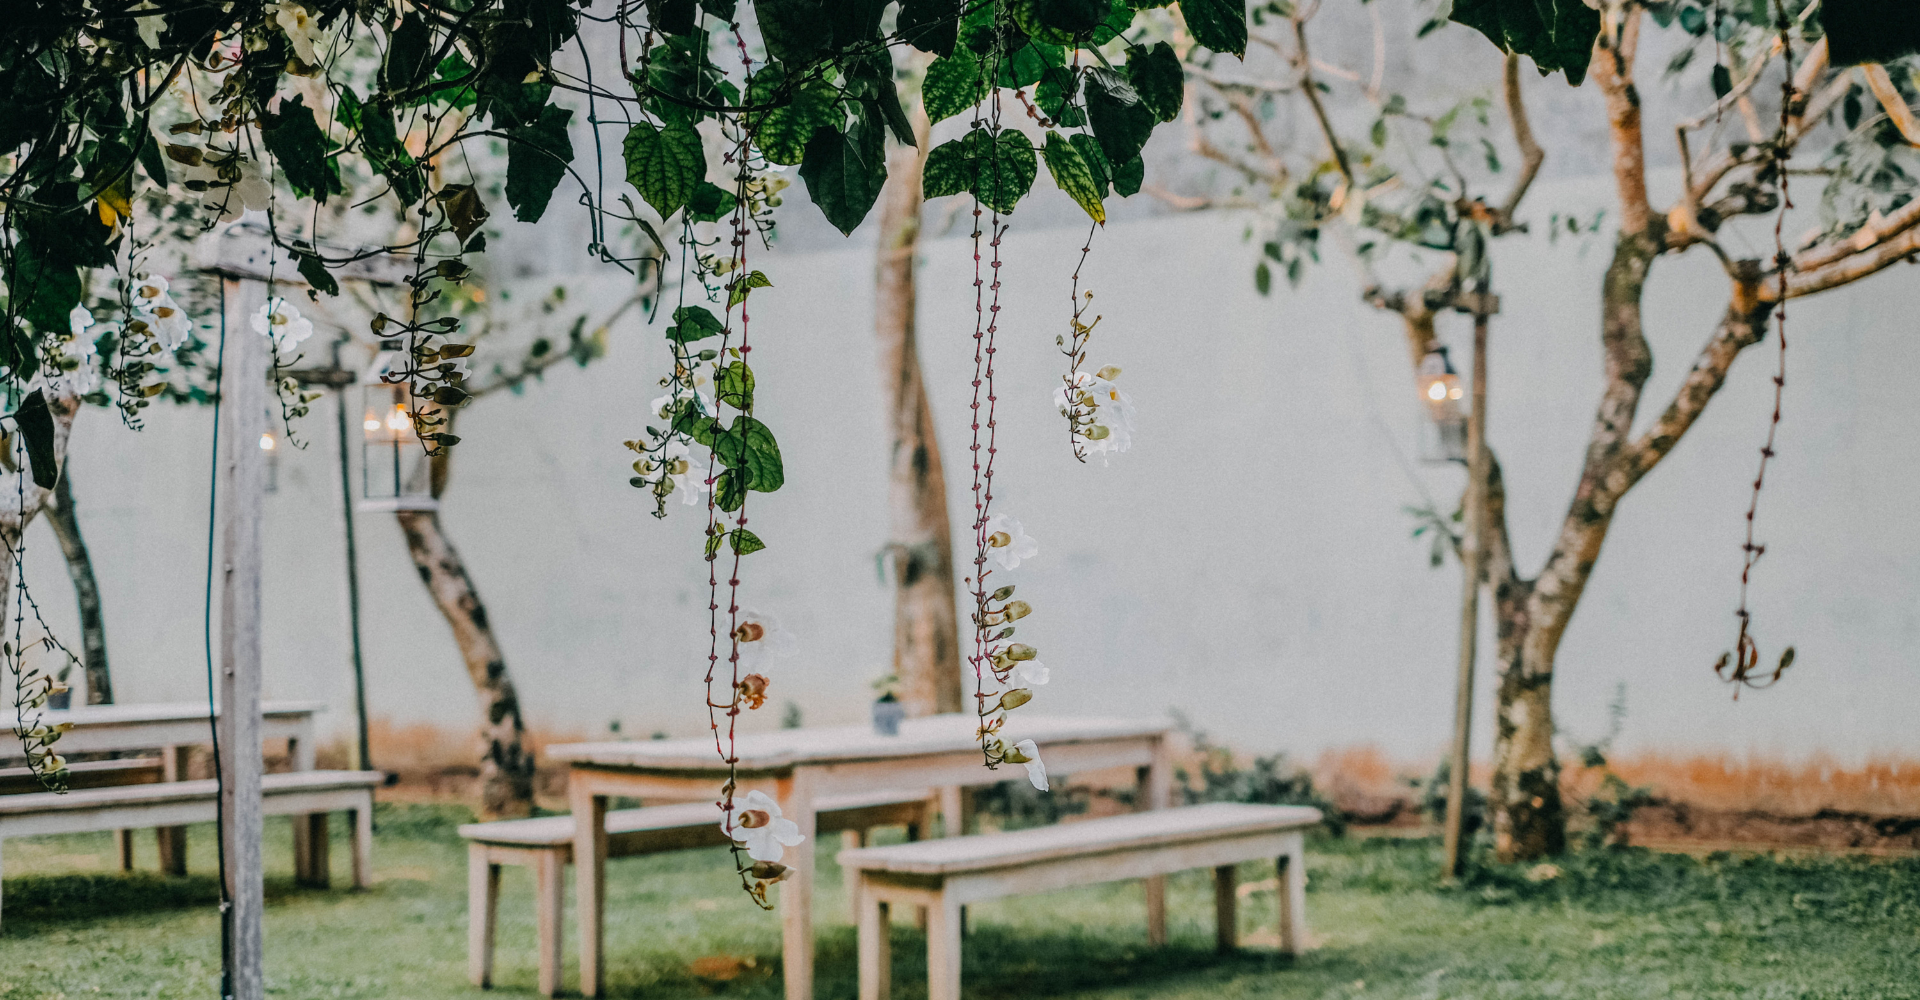 Outdoor garden swing with white flowers and greenery creating a tranquil space for relaxation and nature enjoyment